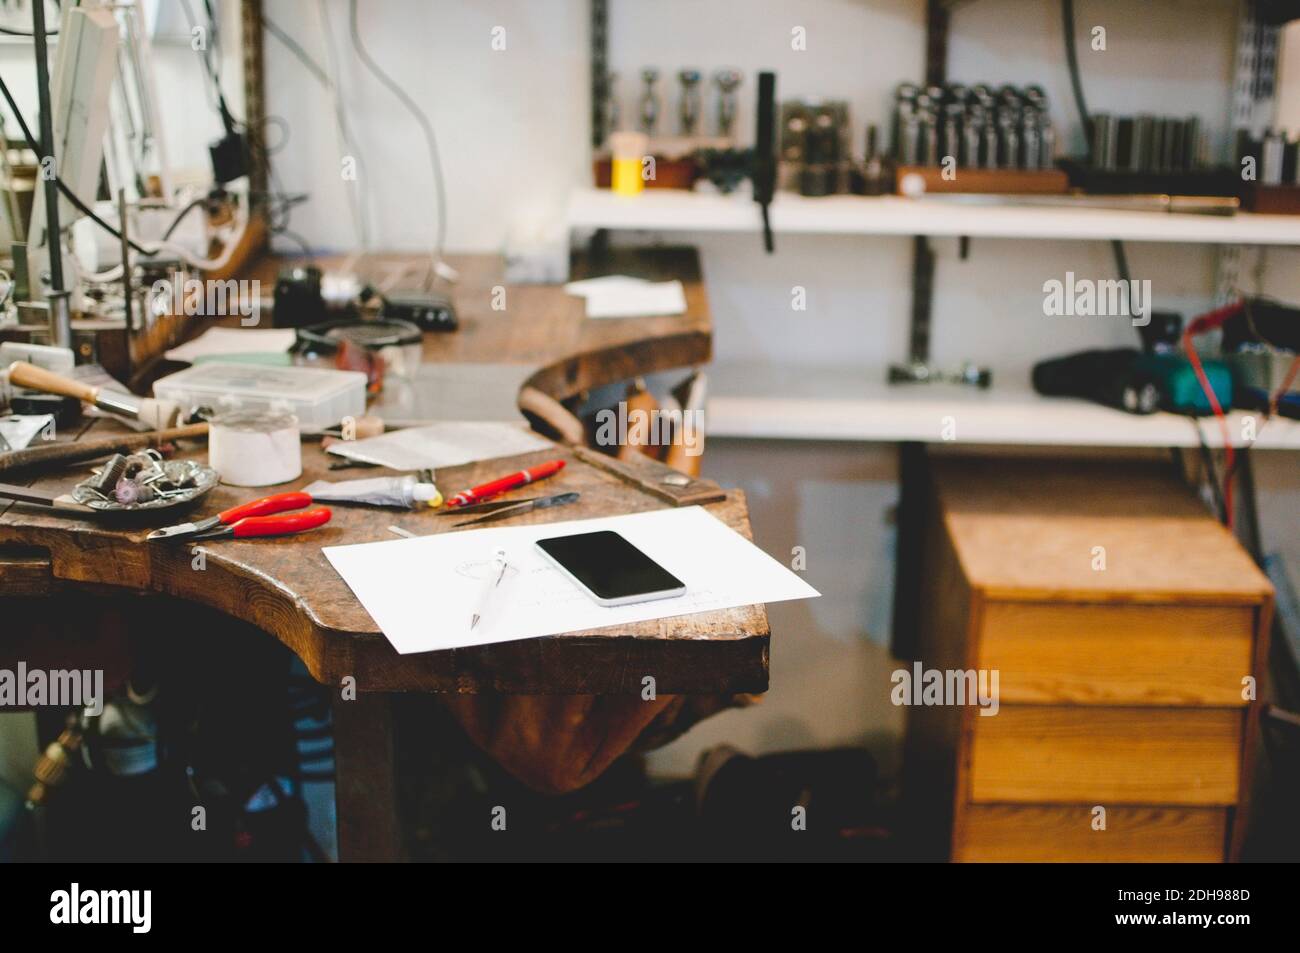 Mobile phone and document on workbench in jewelry workshop Stock Photo